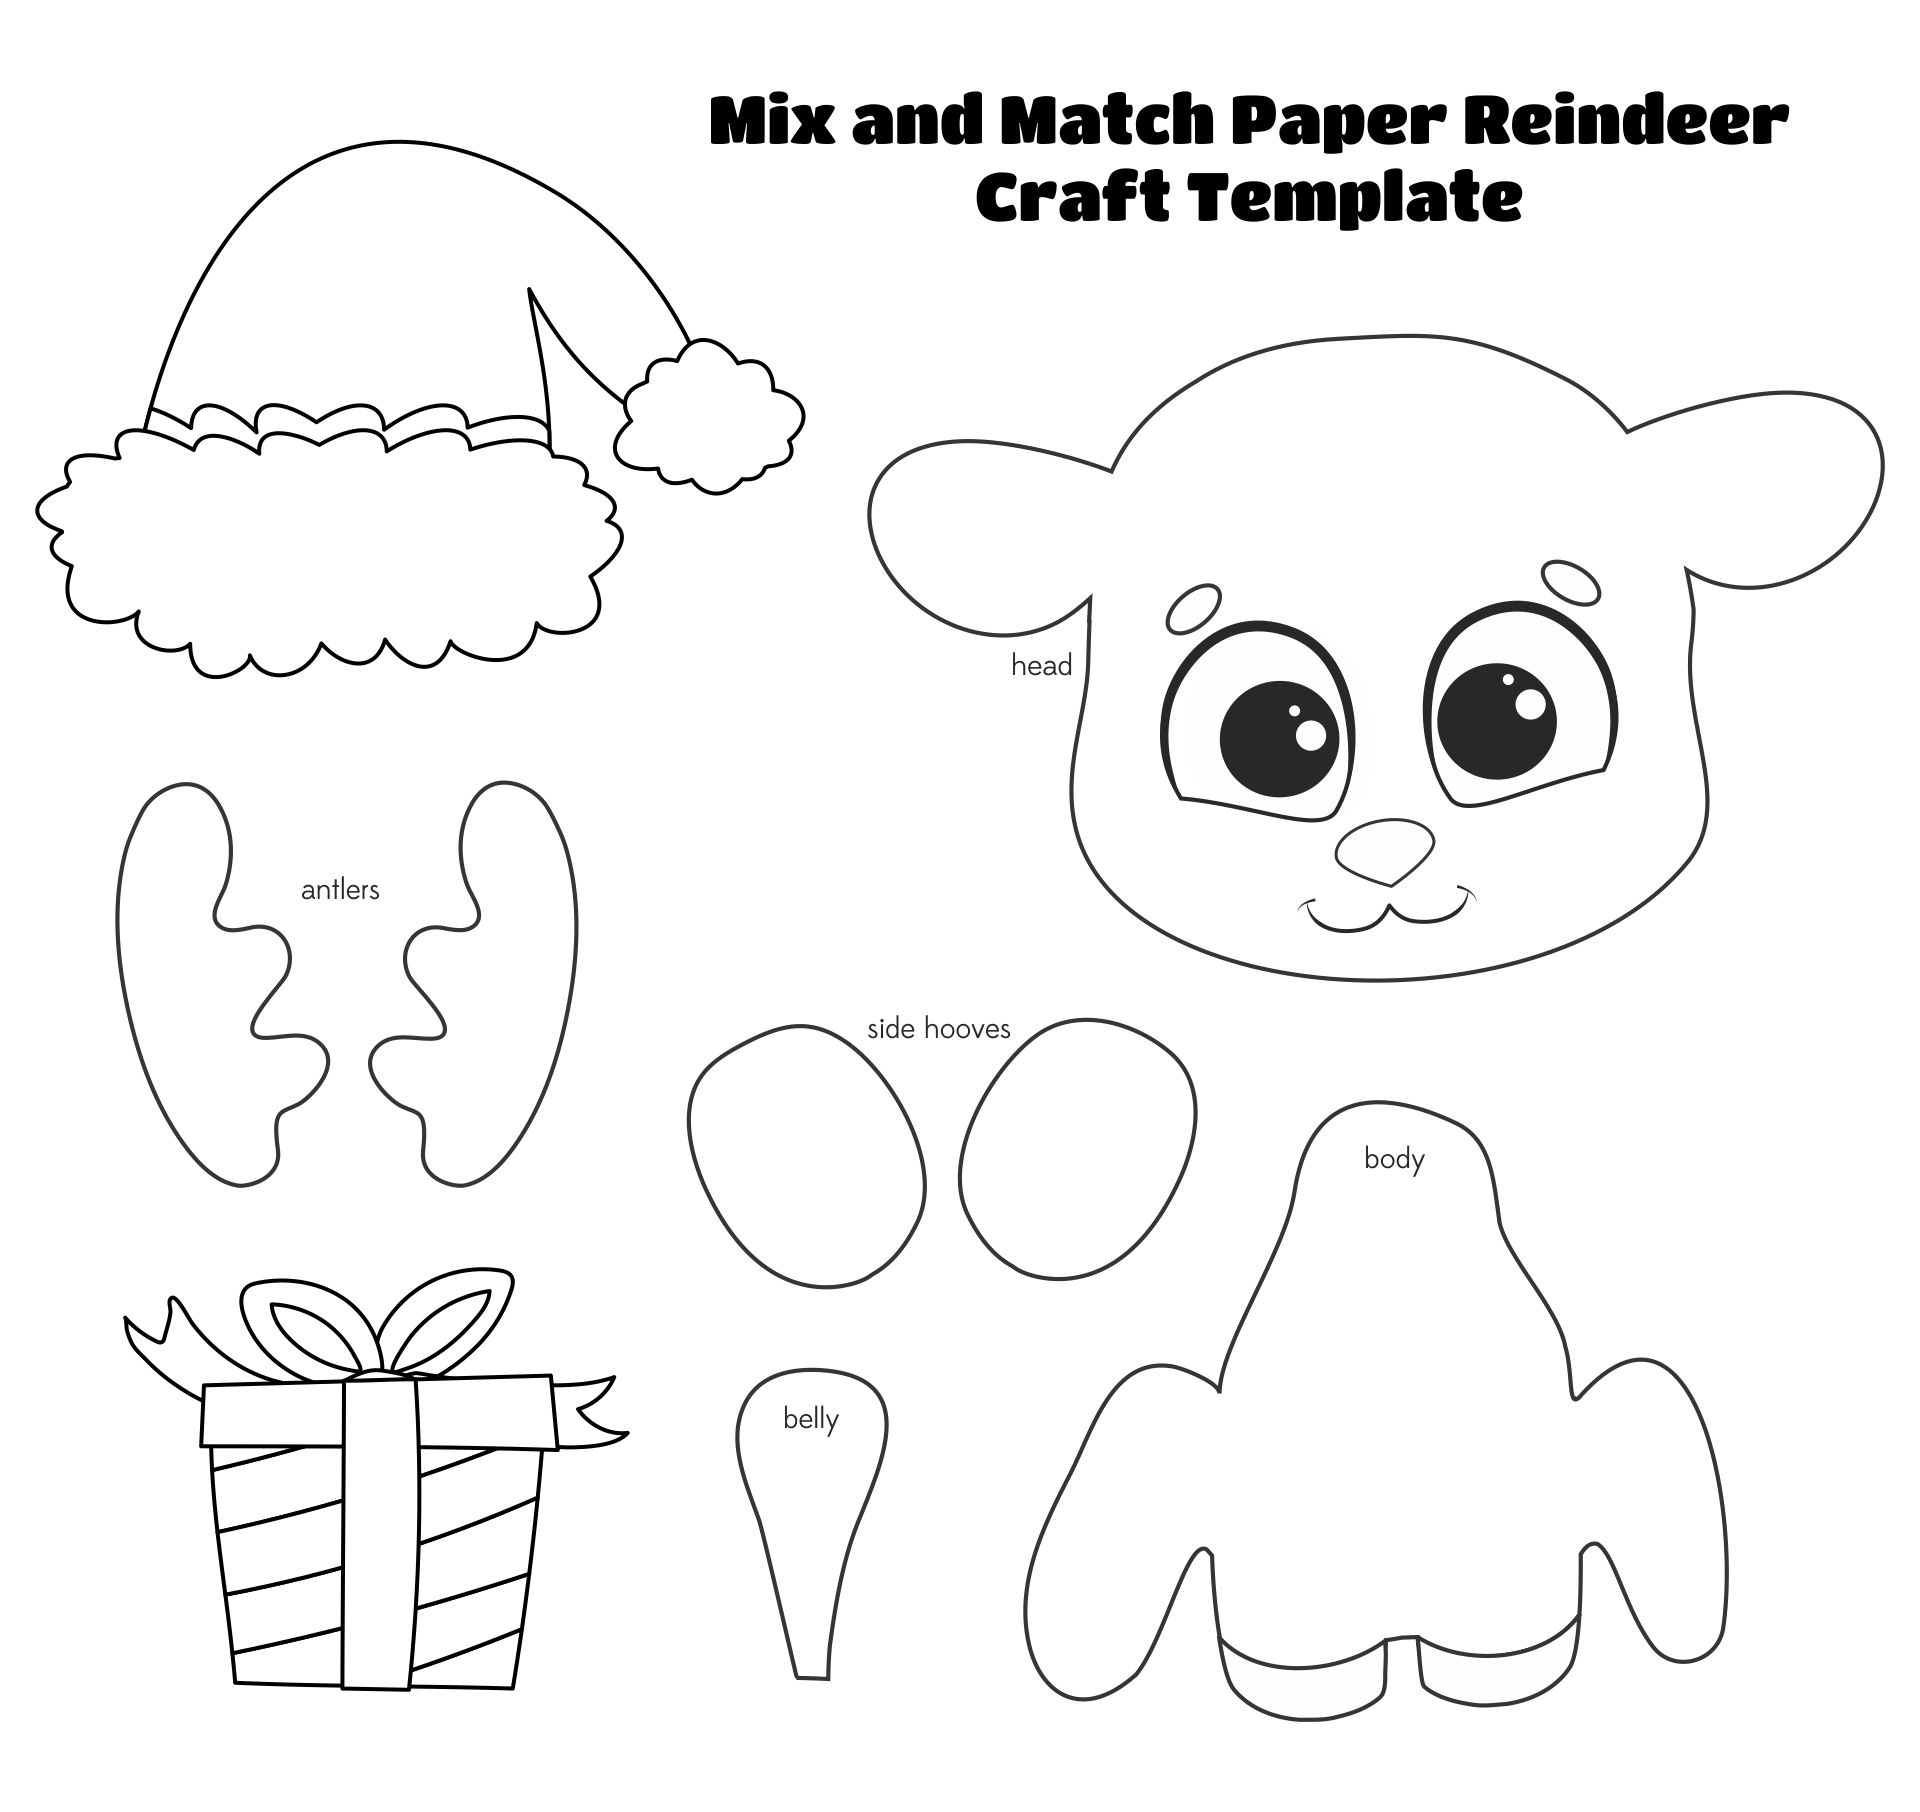 Mix And Match Paper Reindeer Craft Printable Template